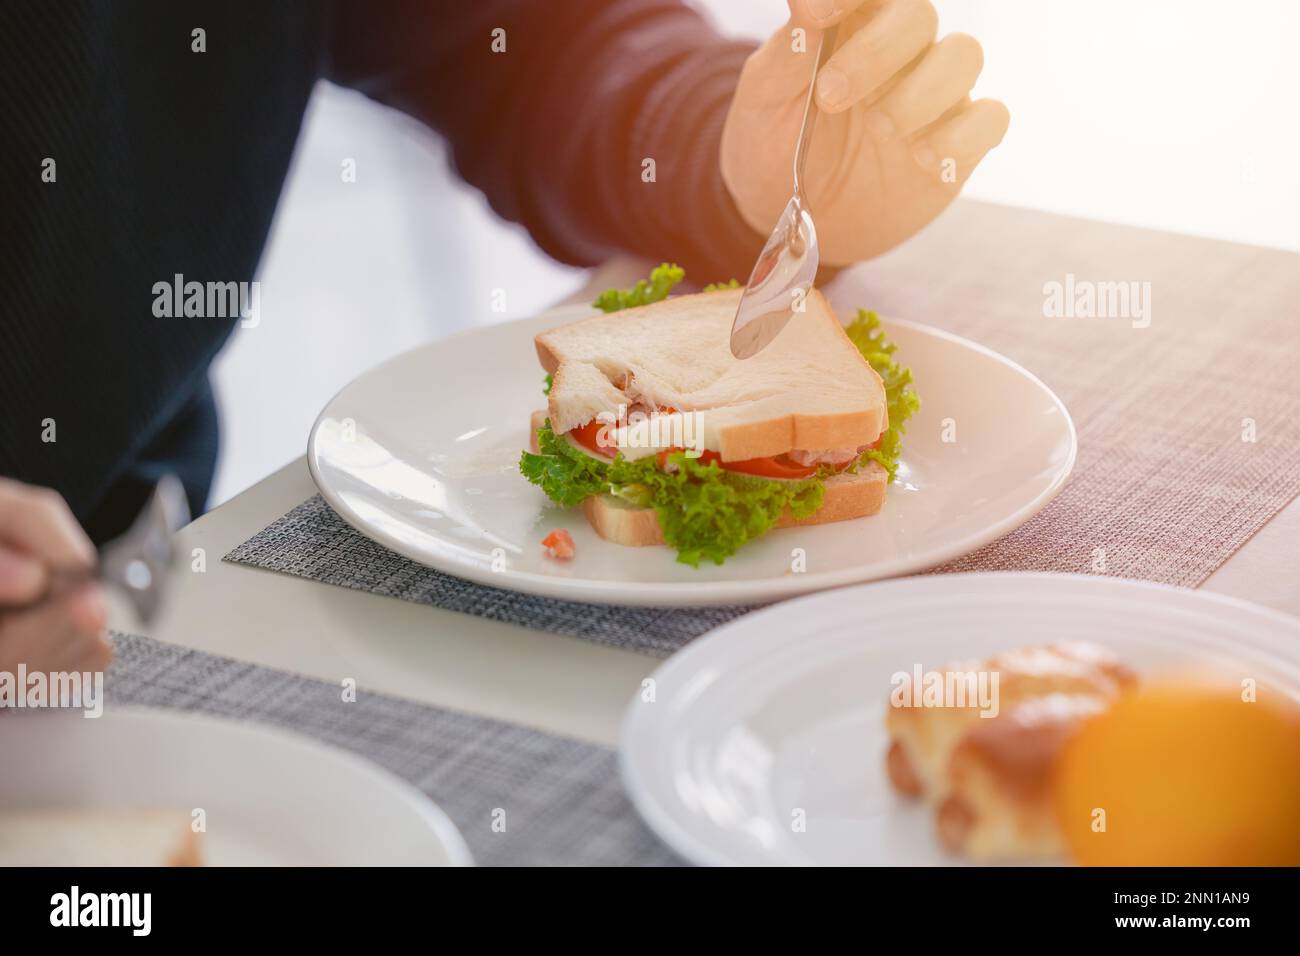 close up vegetable sandwich people eating healthy meal on morning lunch table Stock Photo